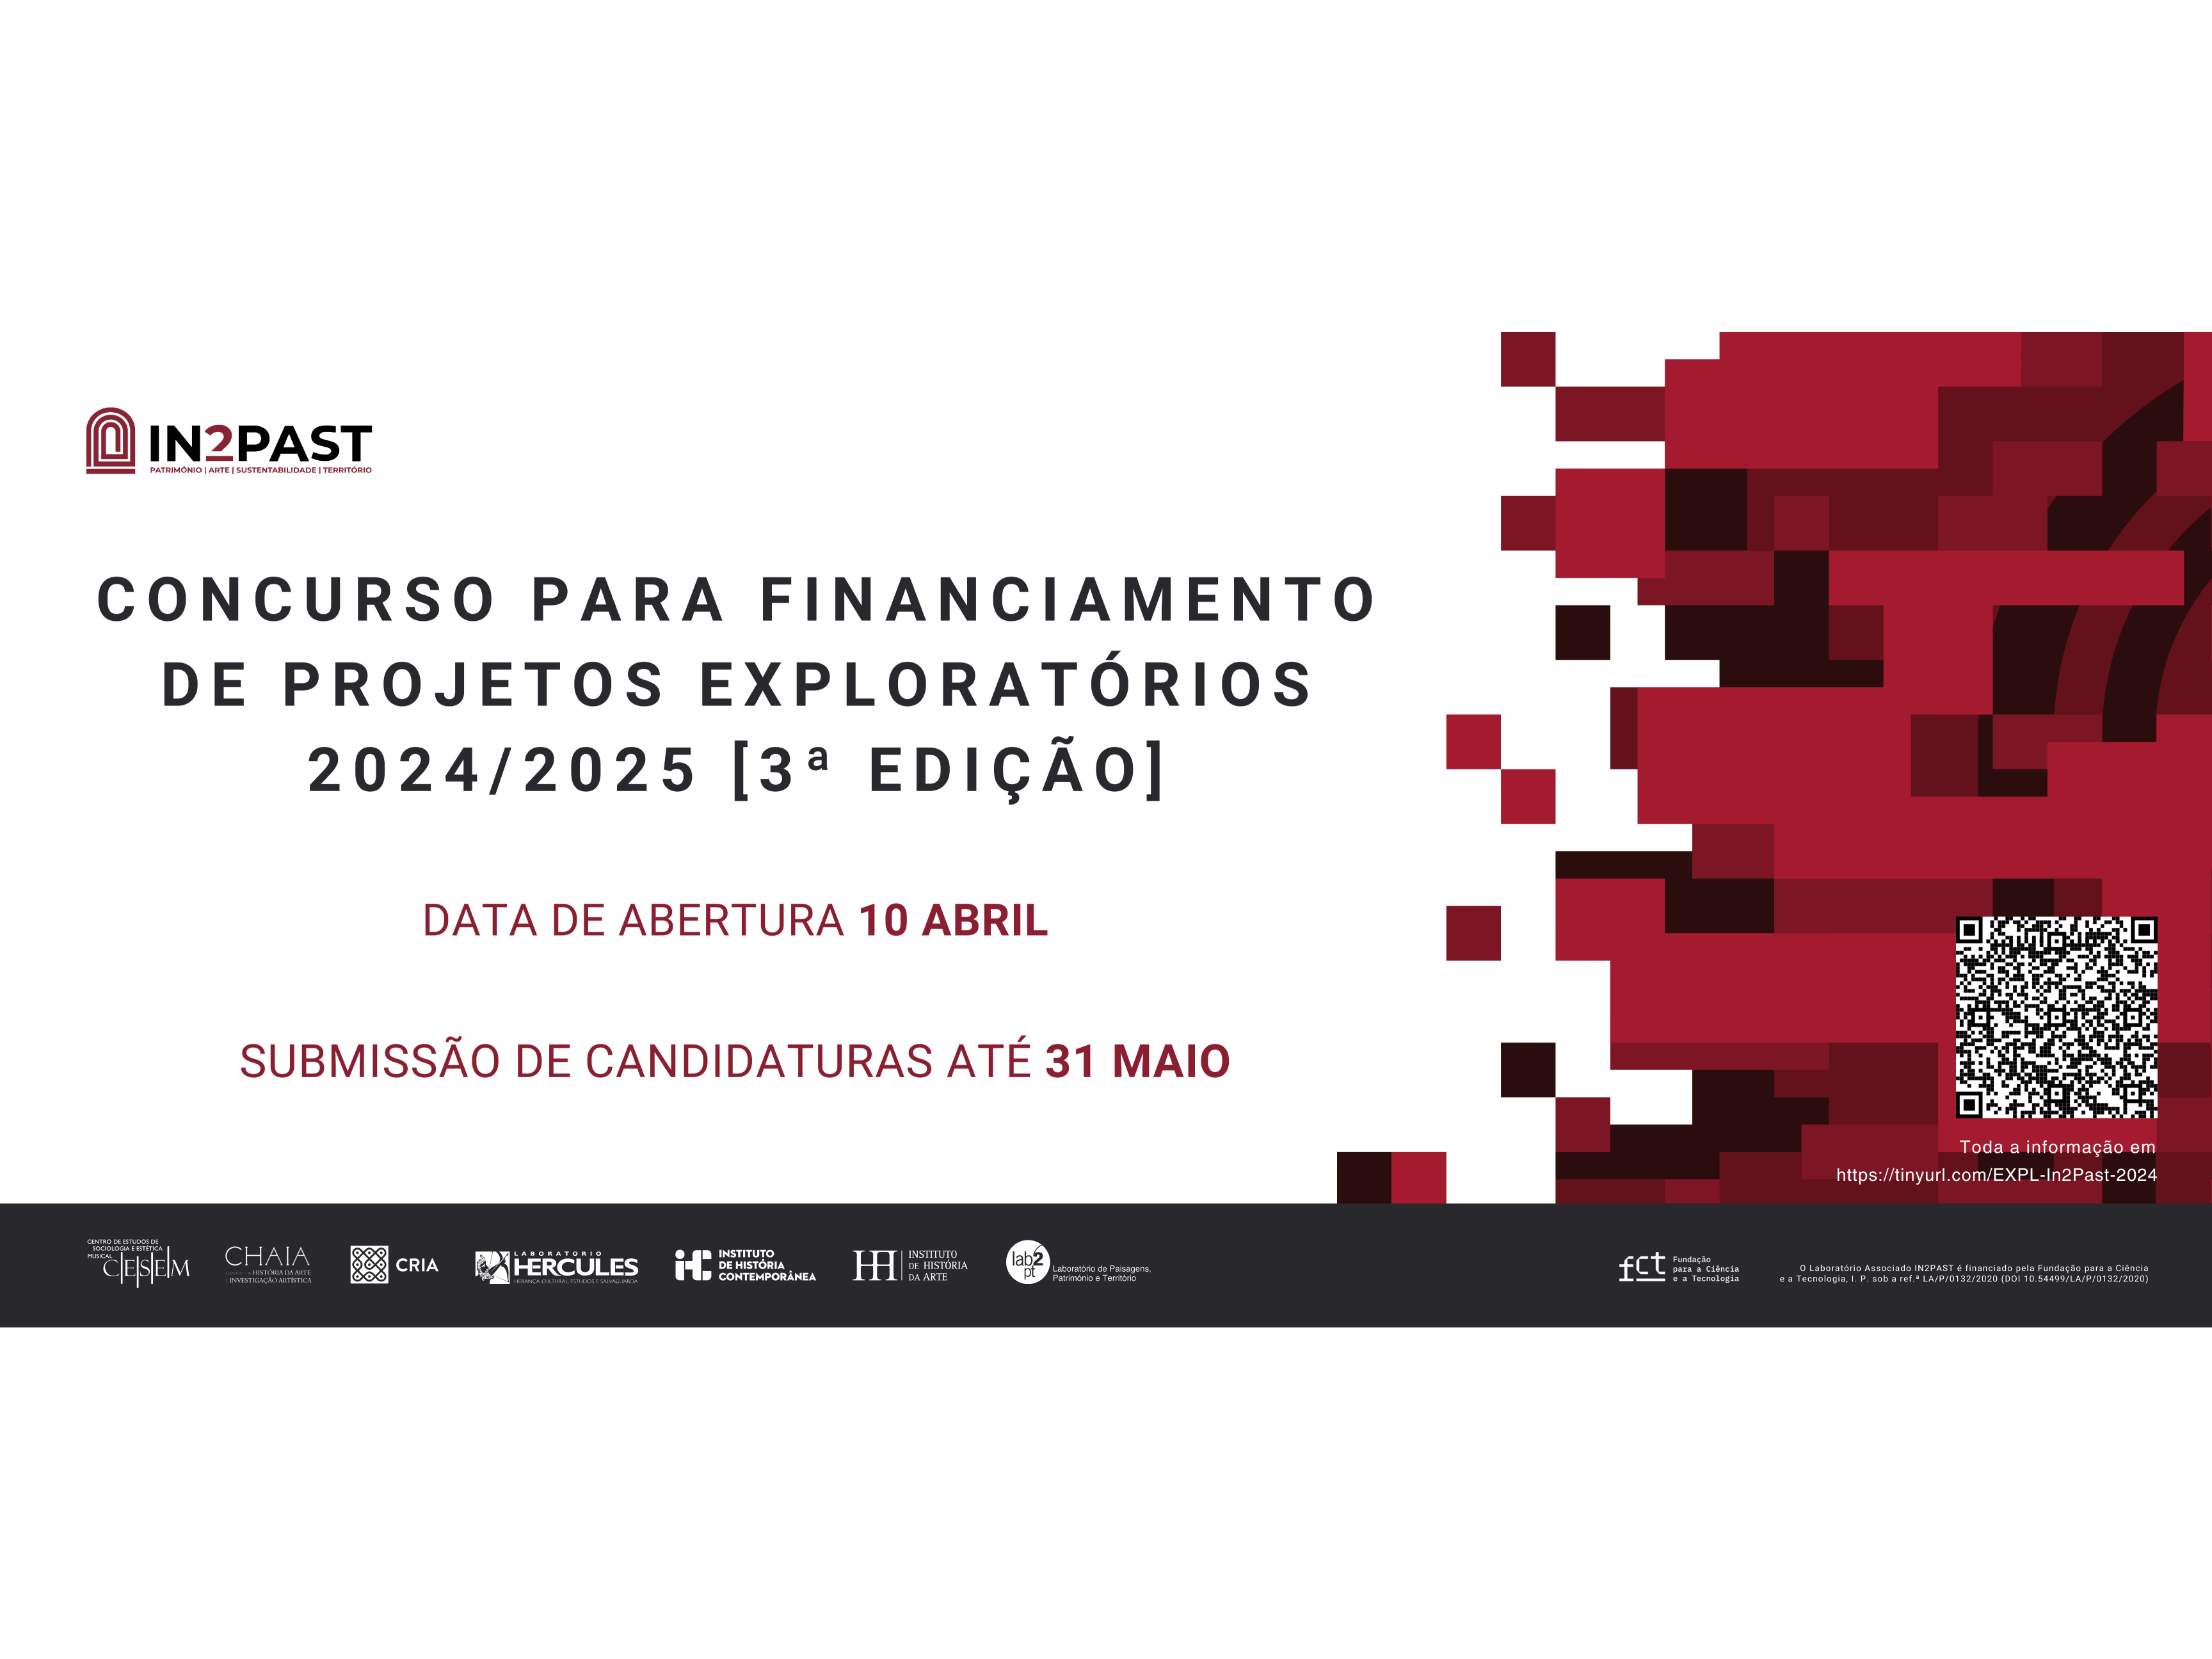 3rd edition of the Call for Funding of Exploratory Projects of the IN2PAST  image